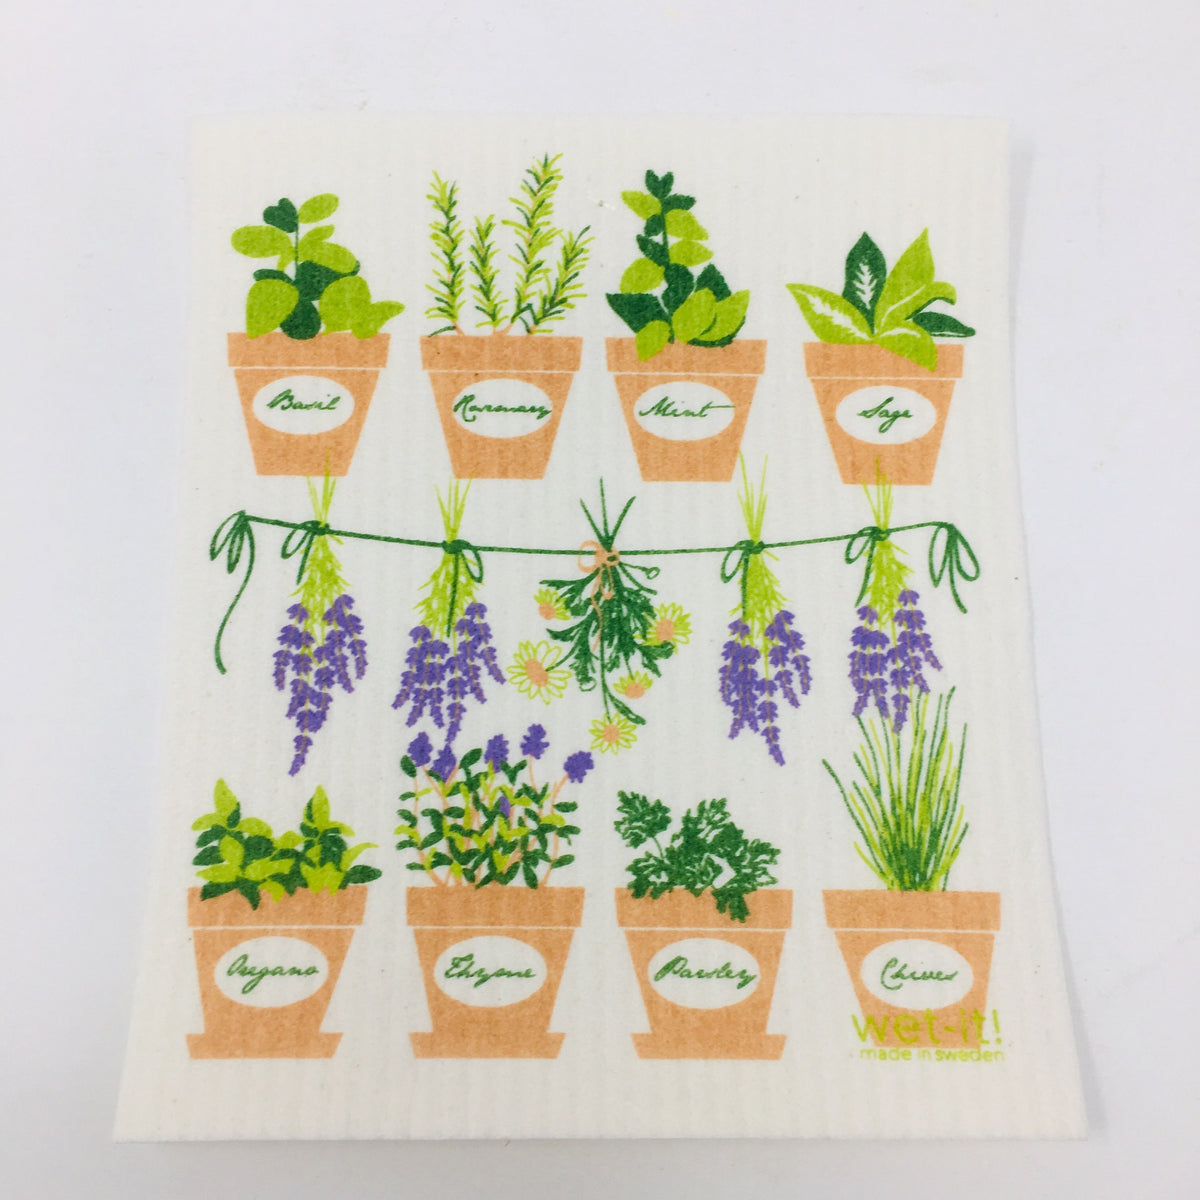 ivory colored rectangle shaped scrubbing pad with a top row of 4 clay pots of green herb plants, a middle row of lavender and daisies hanging on a line and a bottom row of 4 clay pots with green herbs in them screen printed on it